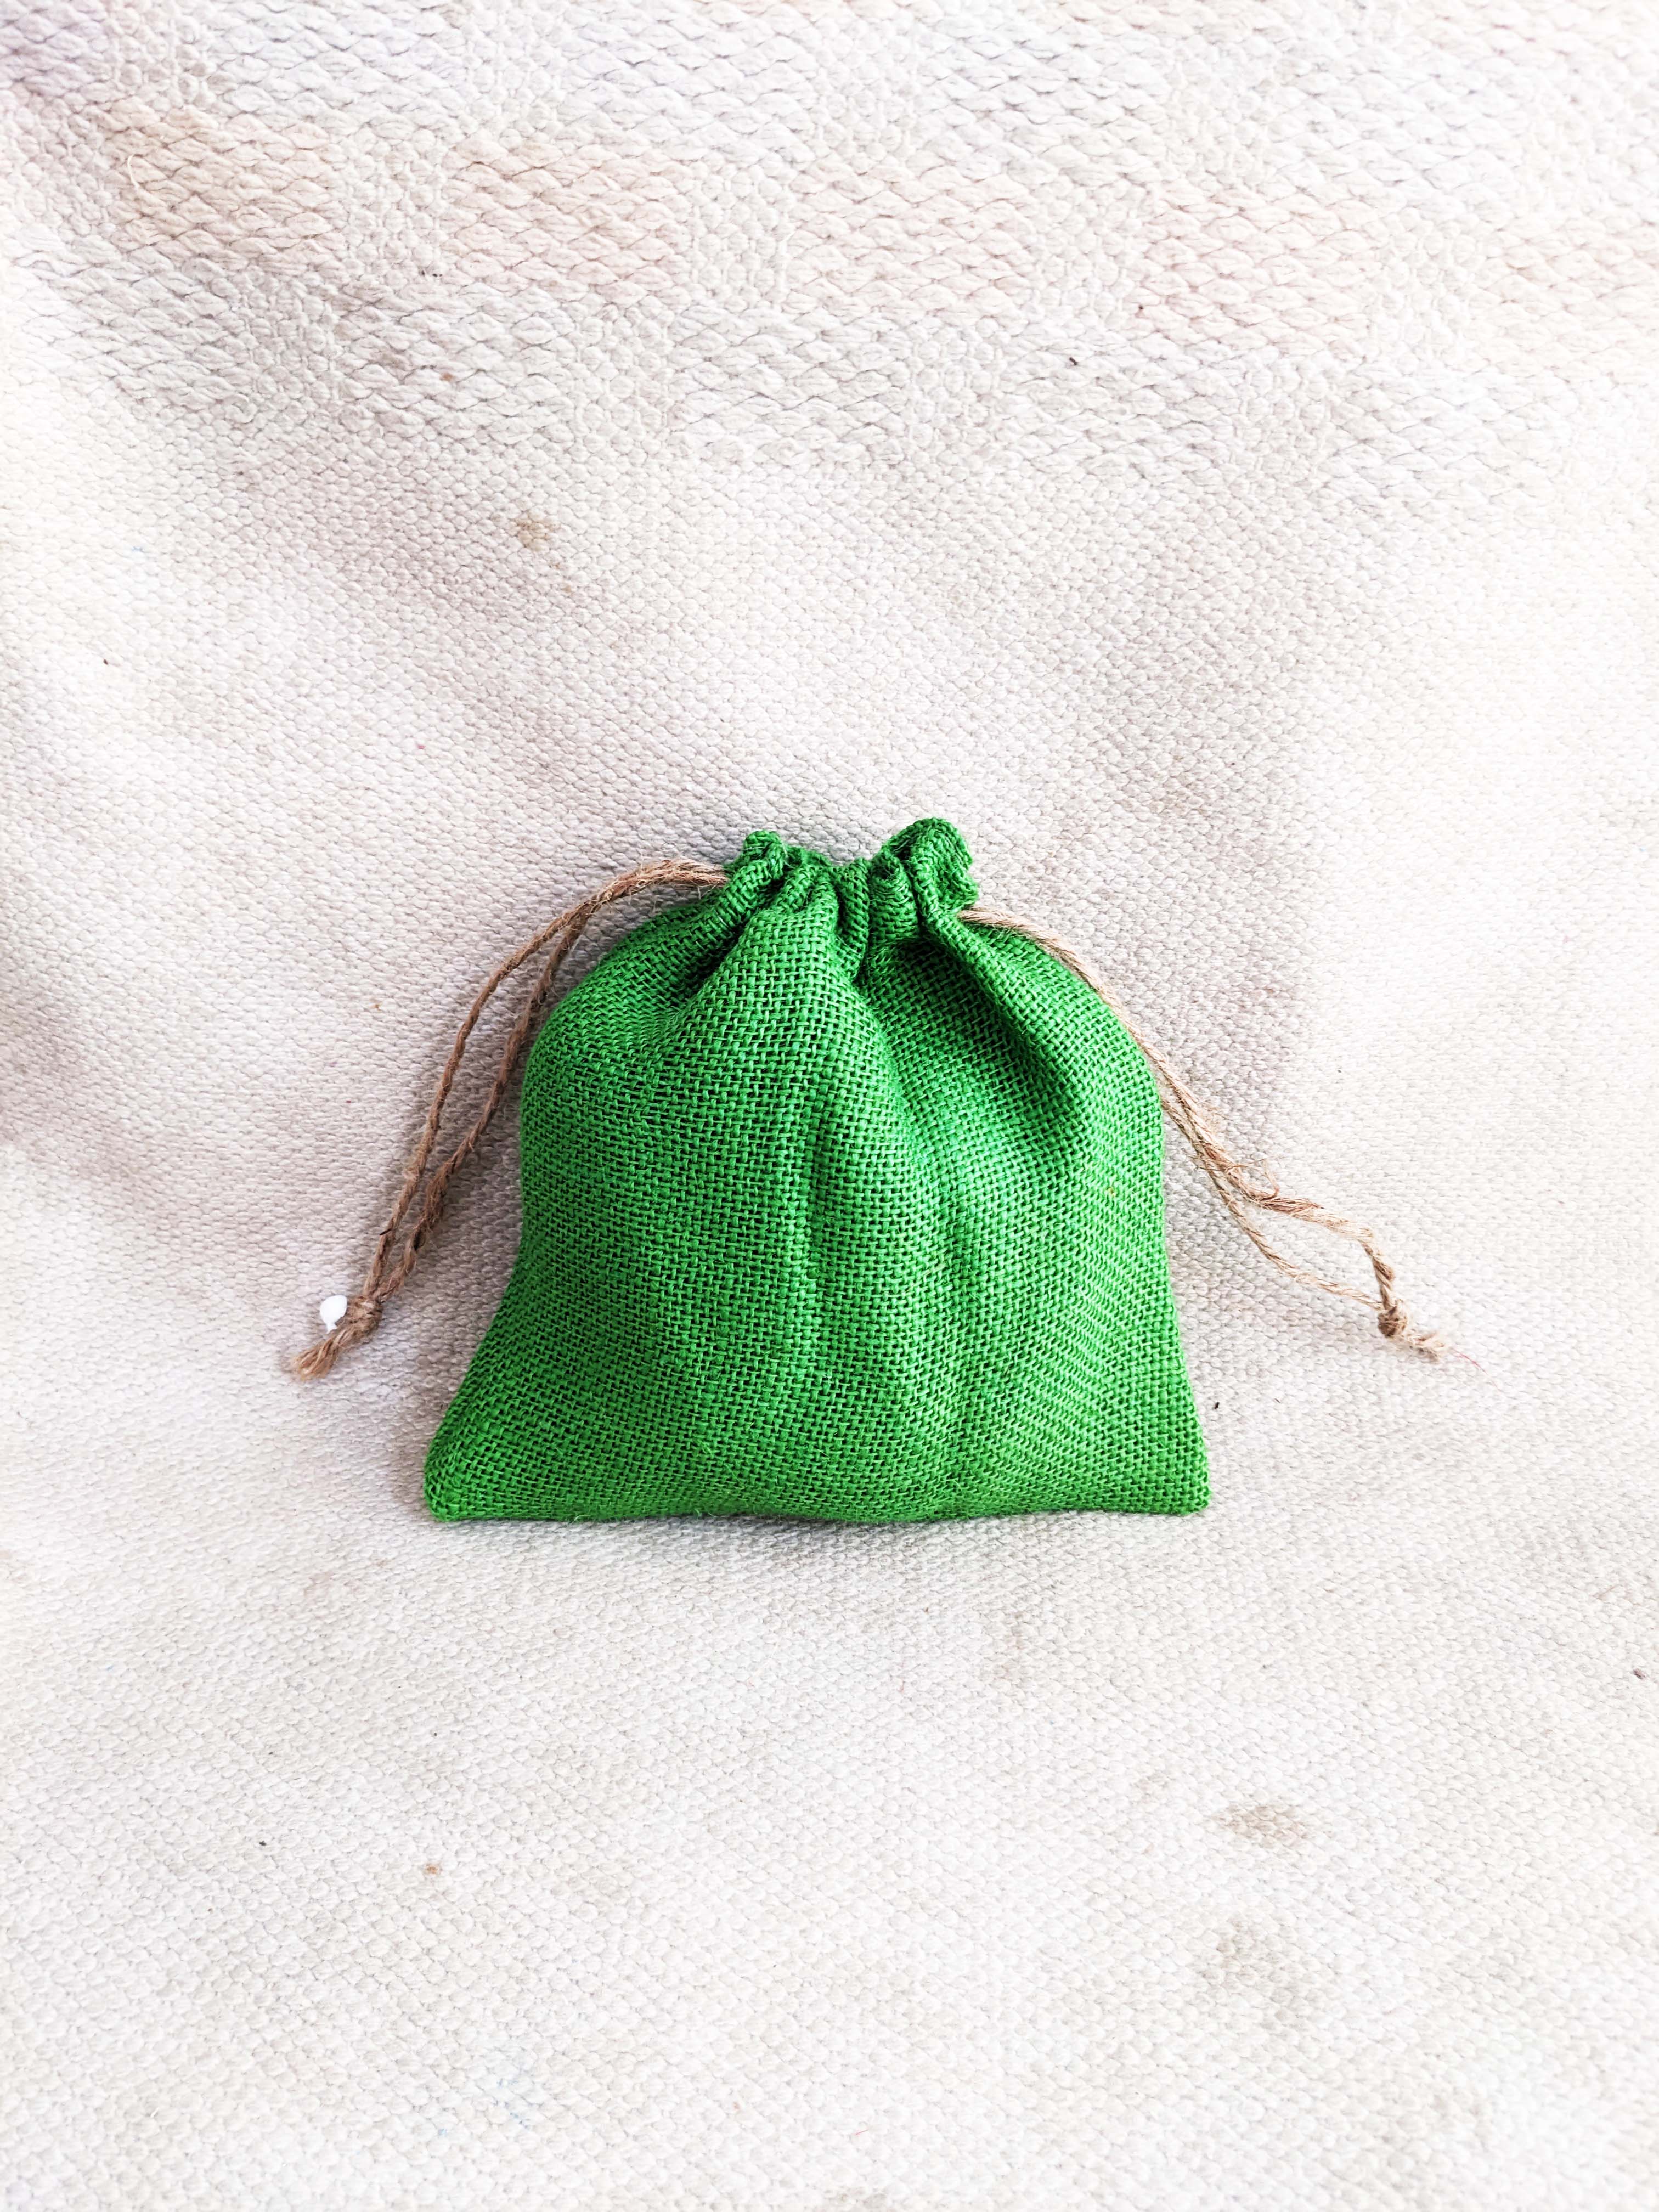 Potli pouches - Gift Bags - Indian Gifts